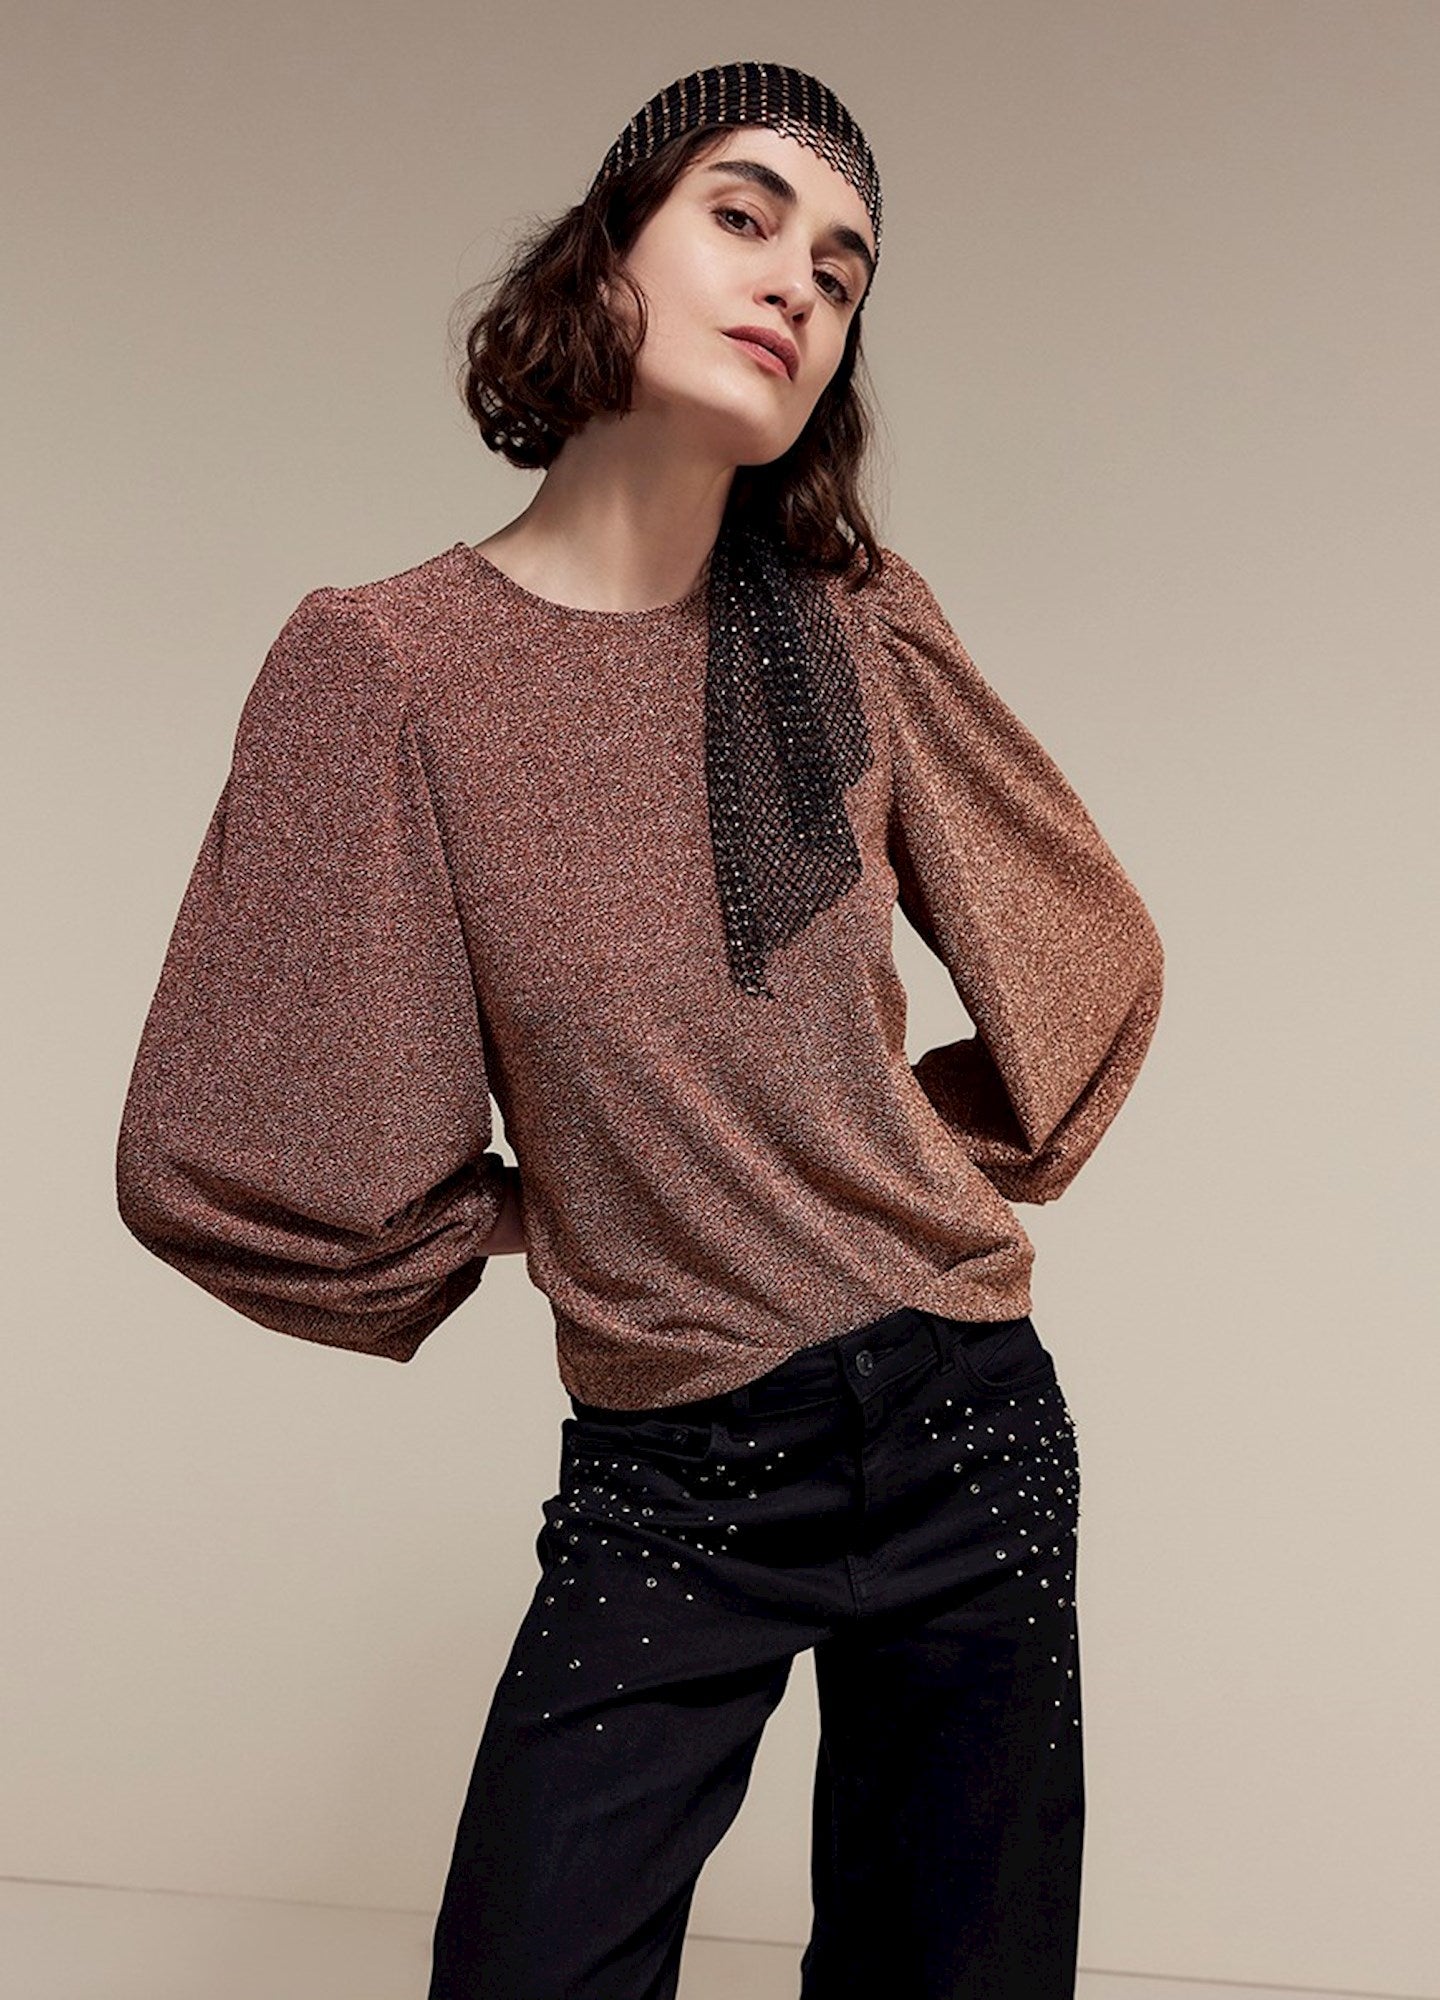 Glittery long-sleeved top